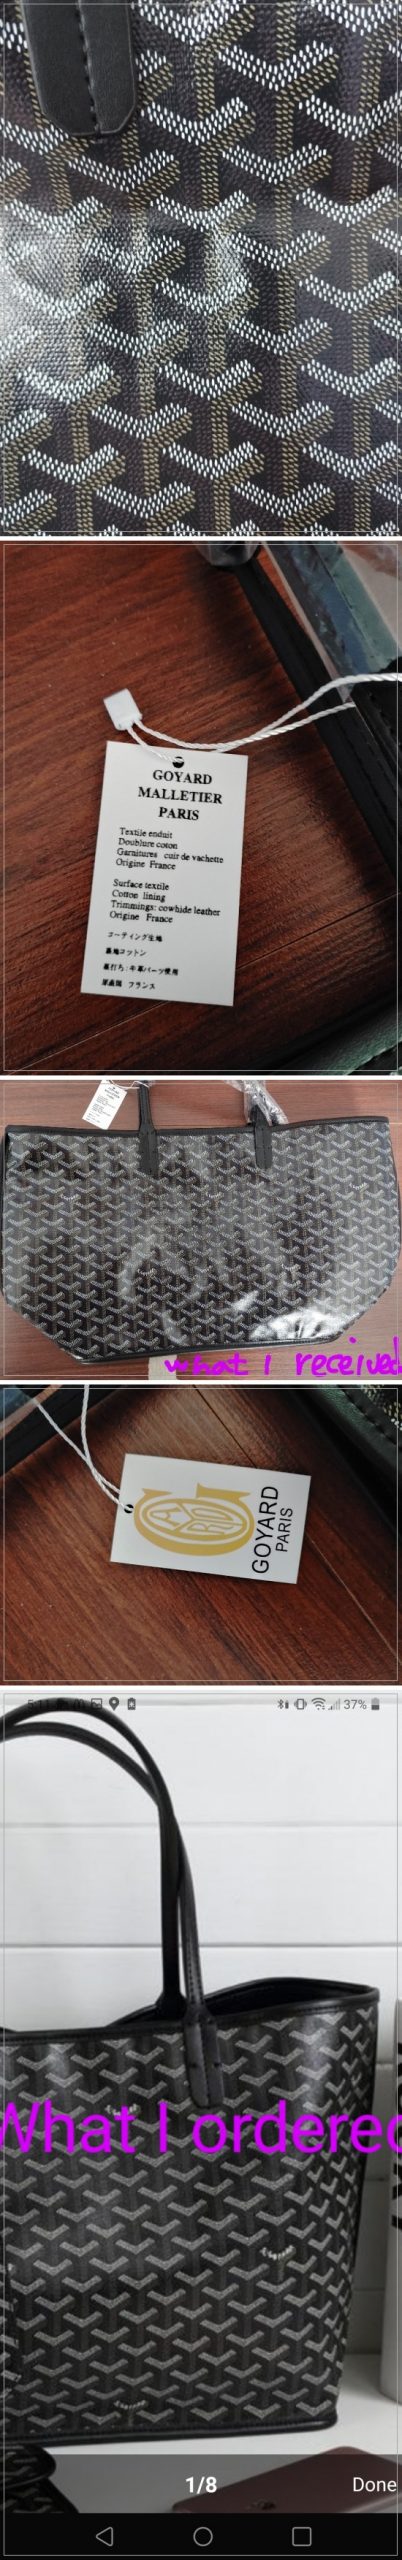 DHgate.com complaint they sold wrong color bag and they still don't refund me(and it is illegal immitation bag)